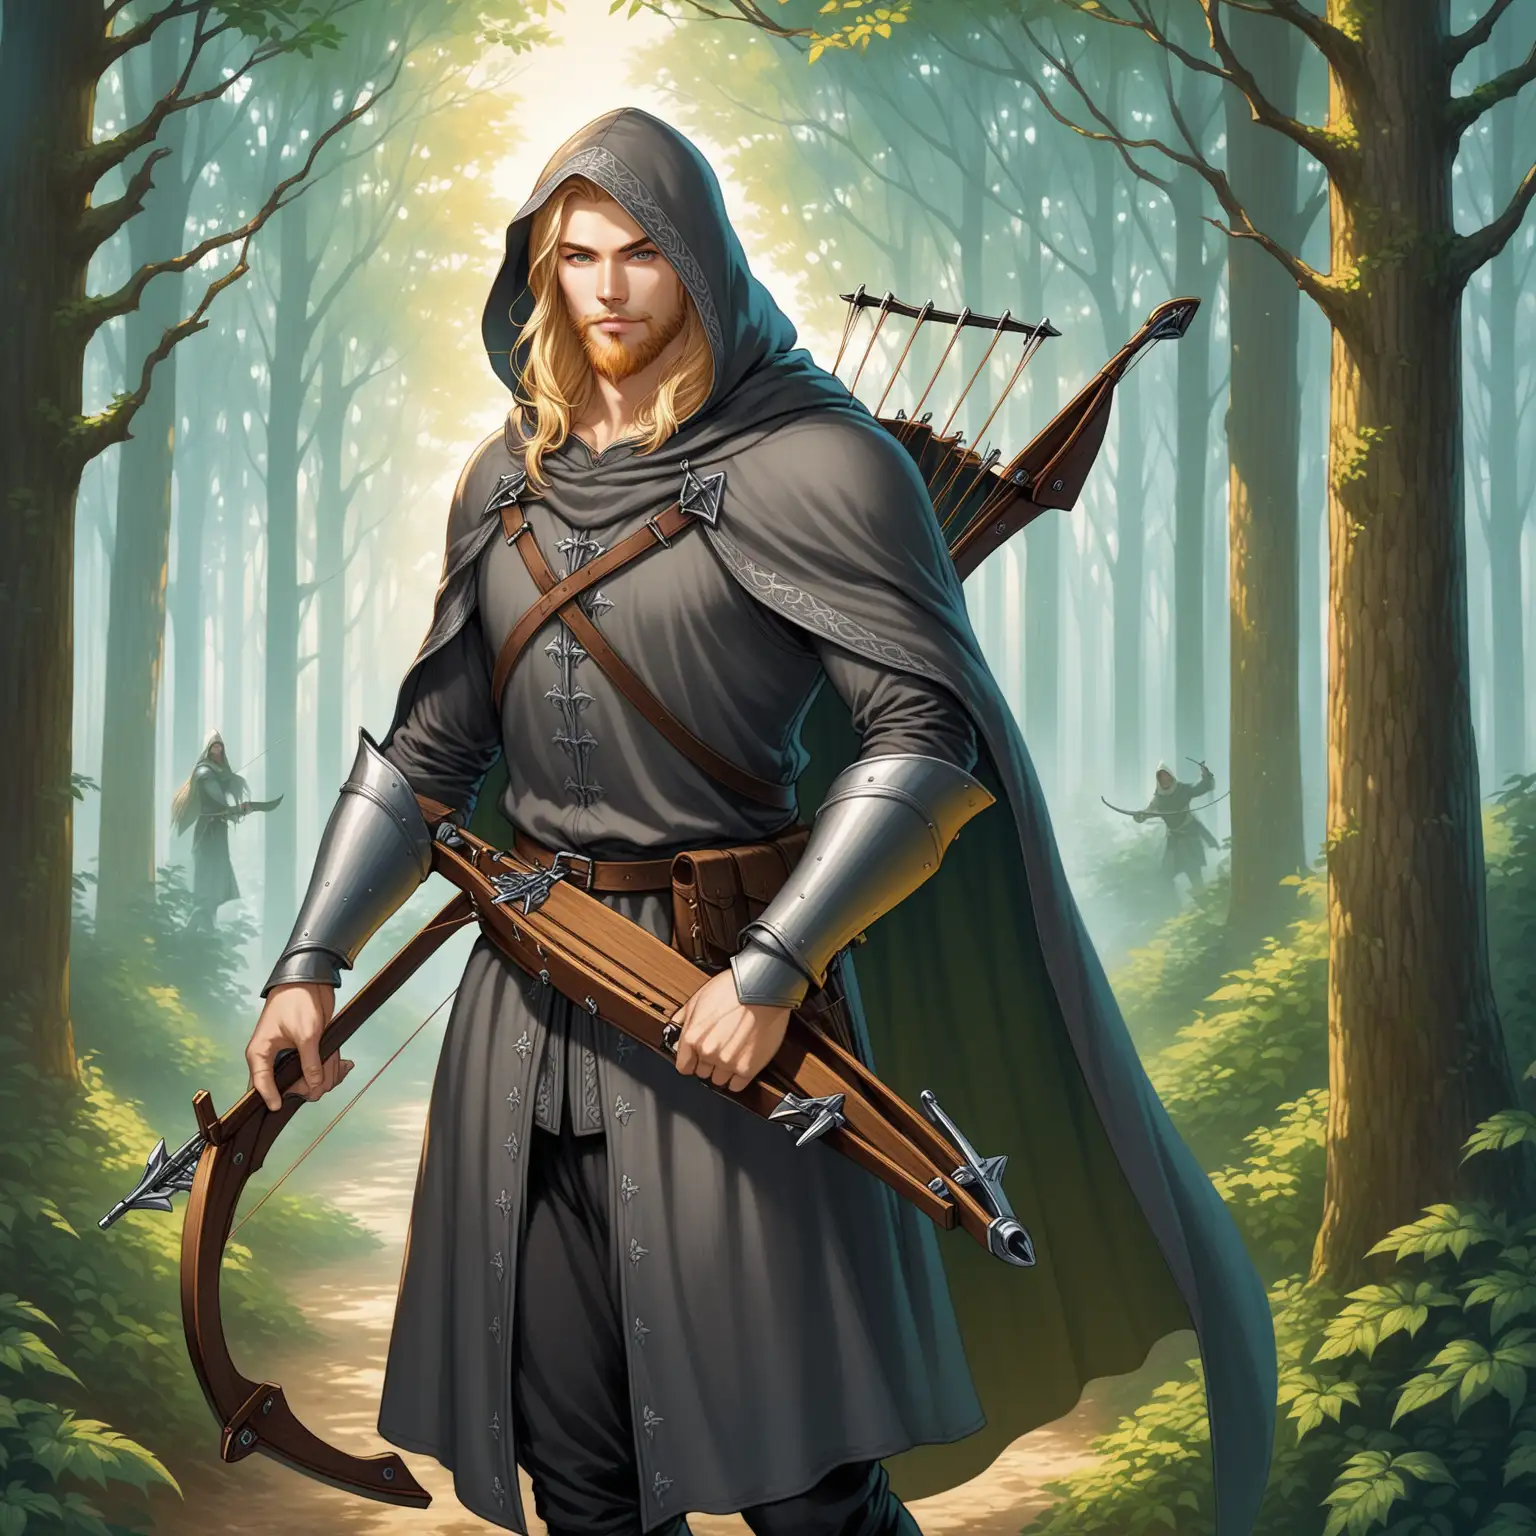 lean young man, beard, long blond hair, Medieval crossbow, black gray clothes with hood and cape, forest, fantasy art